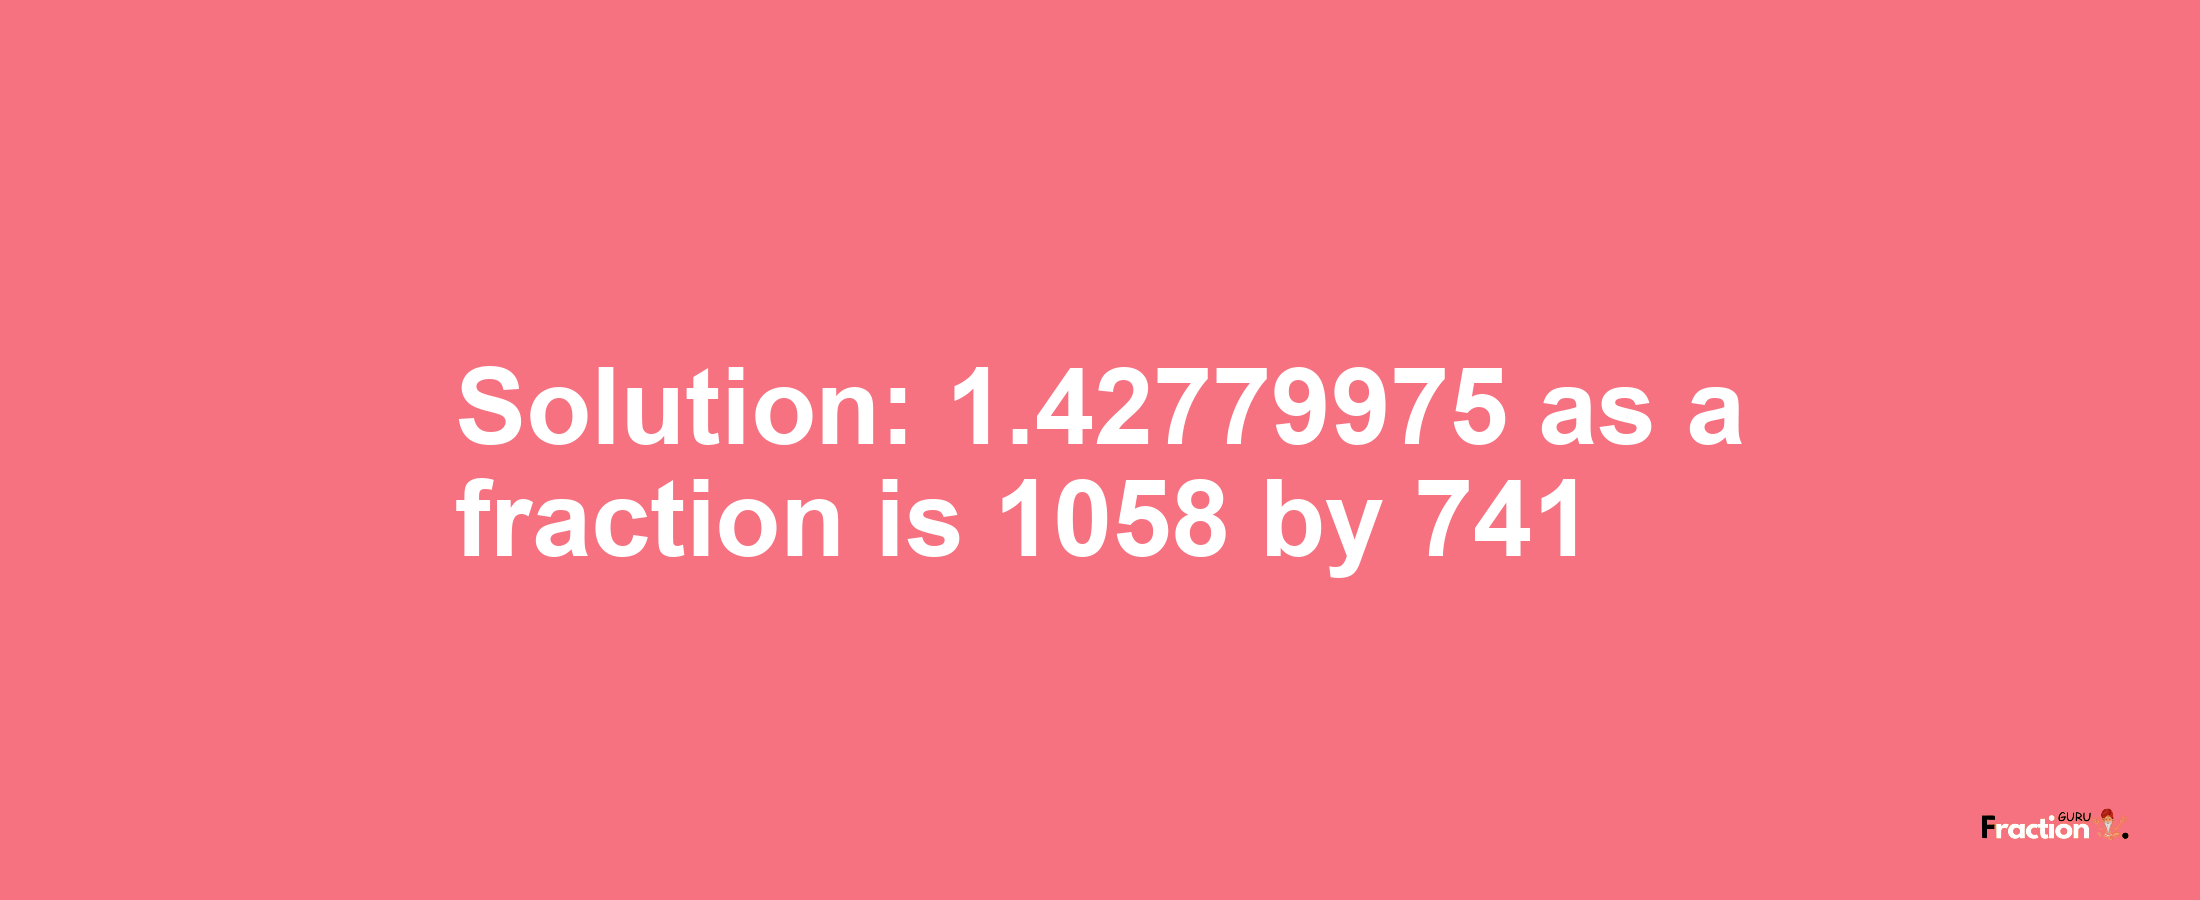 Solution:1.42779975 as a fraction is 1058/741